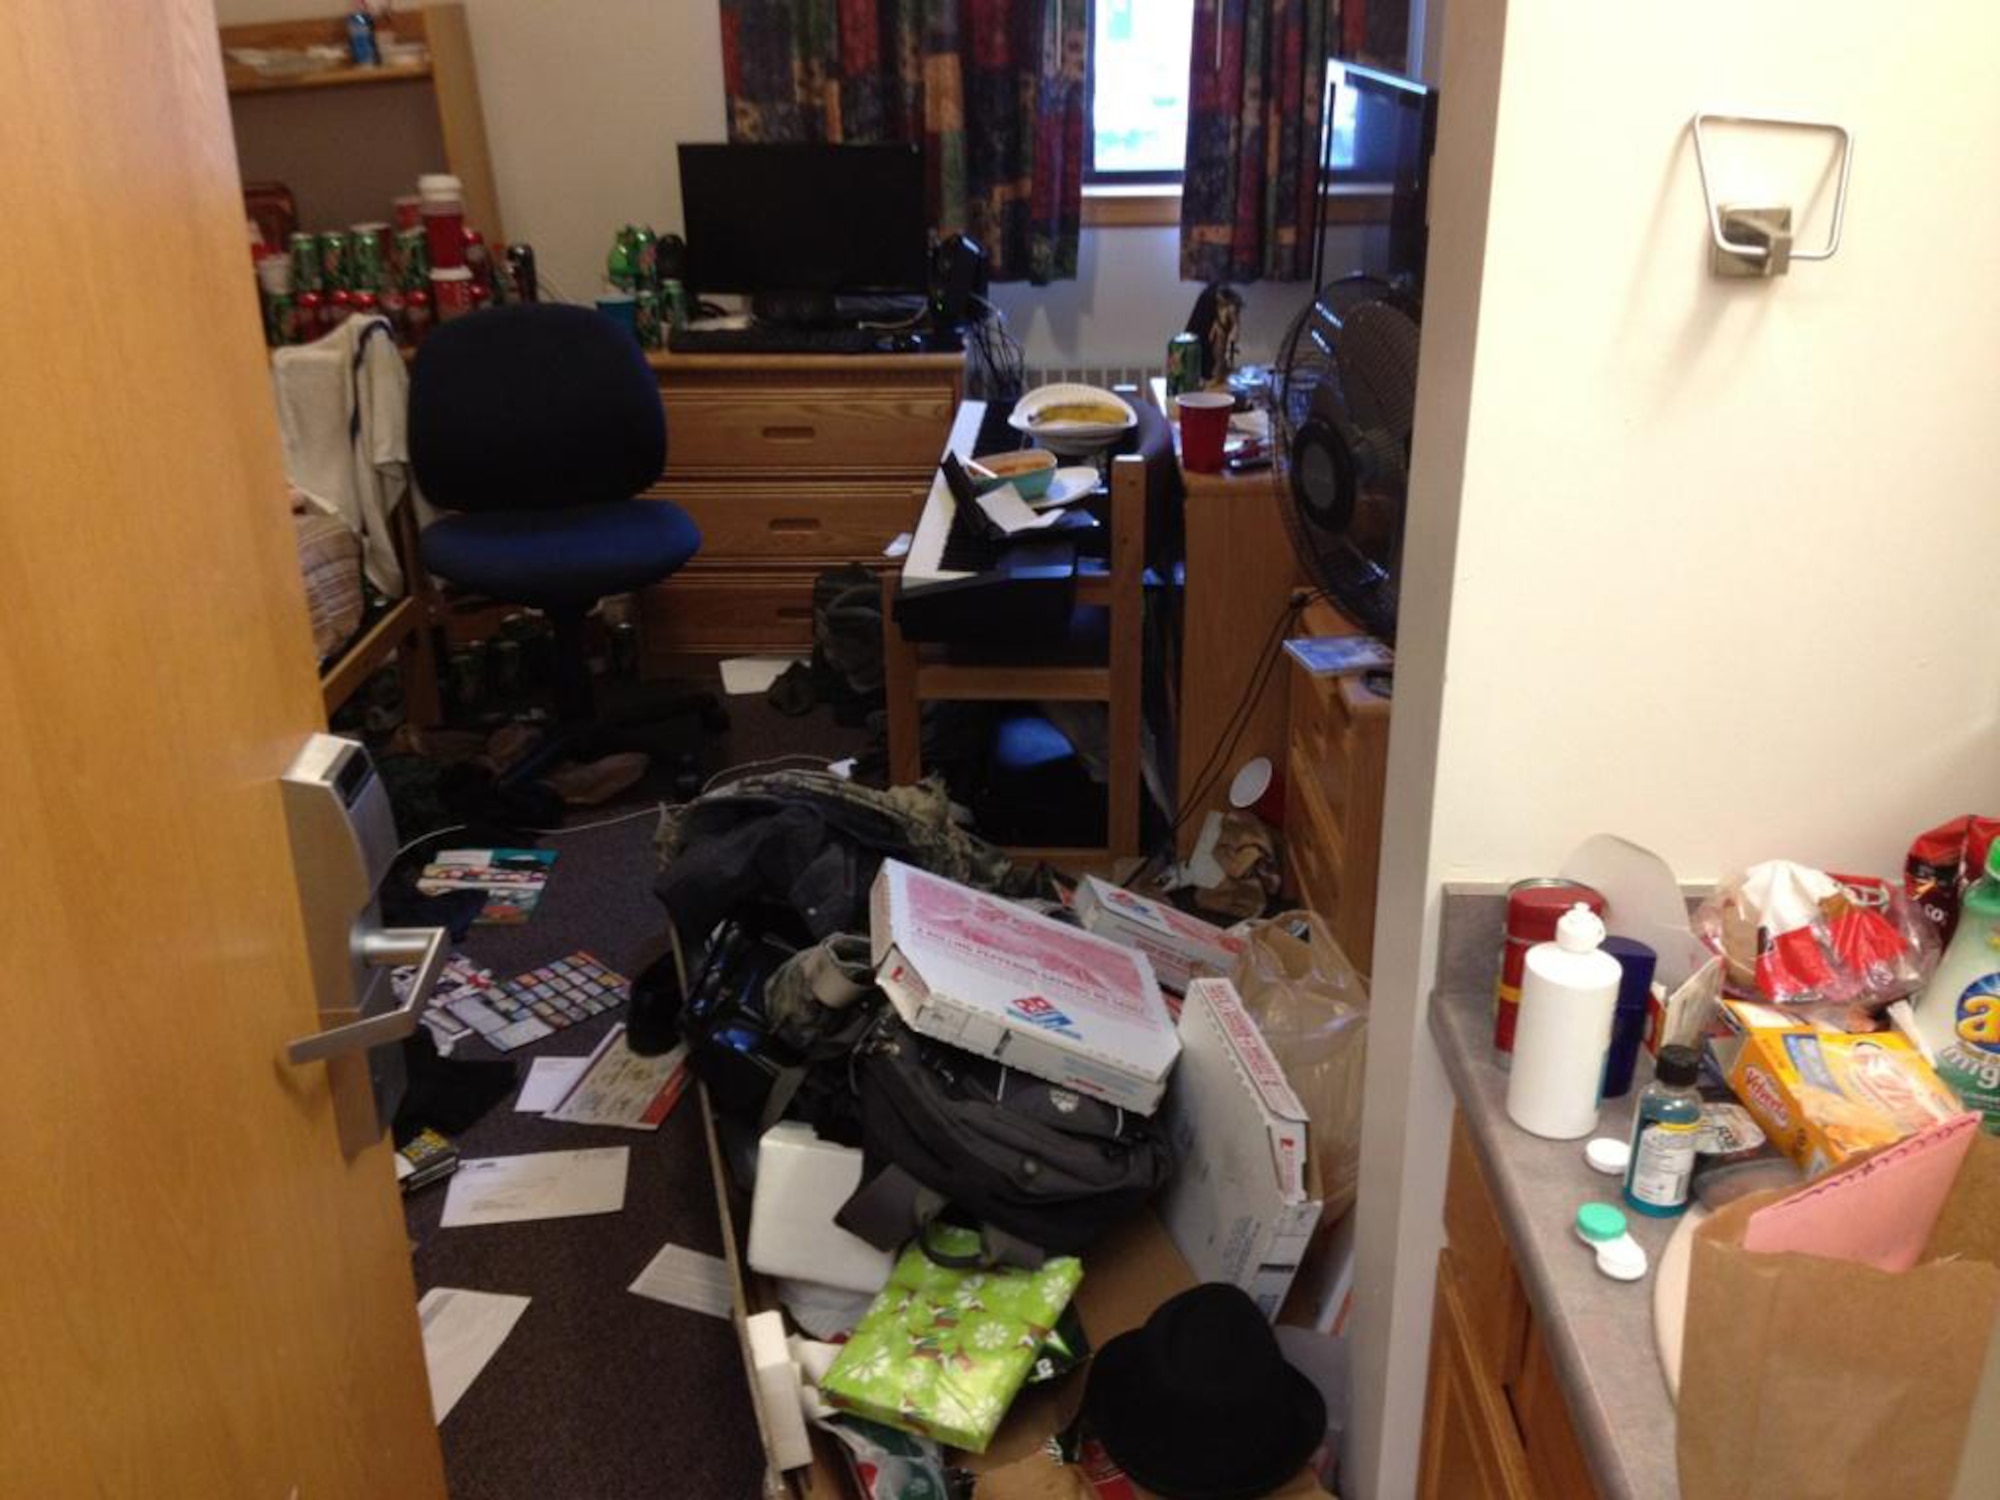 Pictured above is an example of how a dorm should not look. Dorms should be kept clean and orderly as much as possible on a day-to-day basis. Keeping rooms clean can prevent damage to furniture and injury.  (U.S. Air Force courtesy photo)